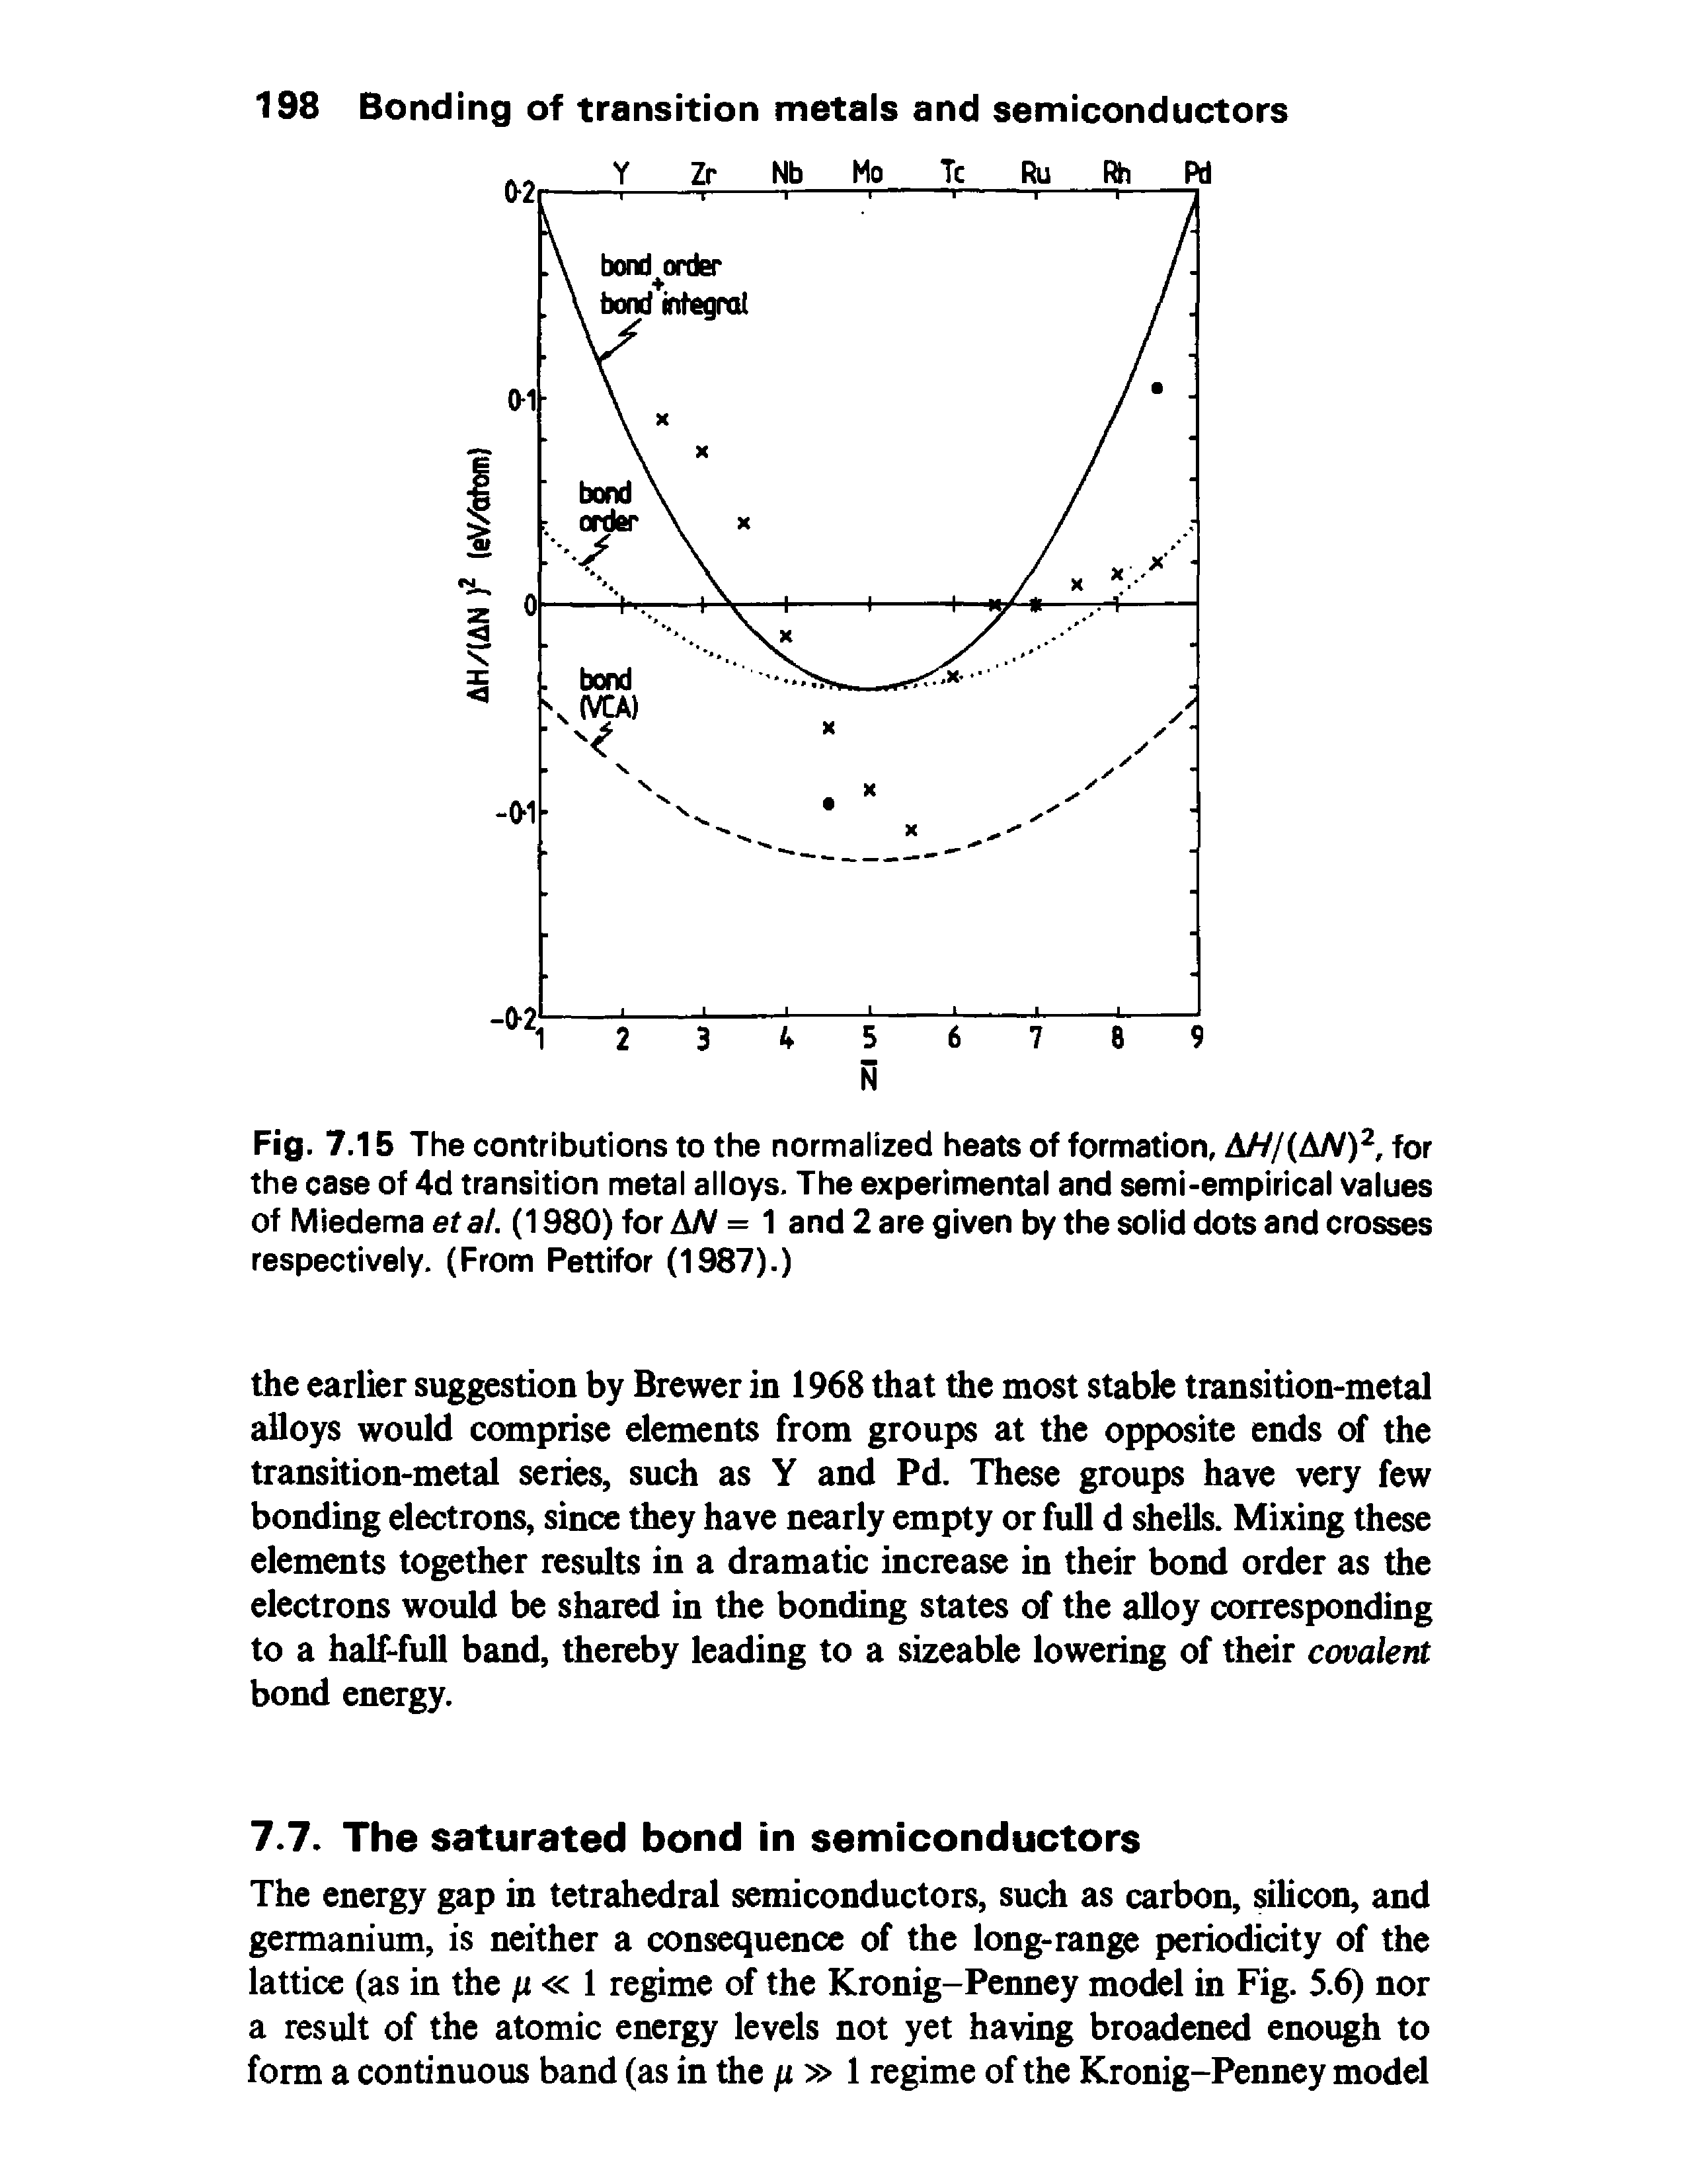 Fig. 7.15 The contributions to the normalized heats of formation, AH/(AN)2, for the case of 4d transition metal alloys. The experimental and semi-empirical values of Miedema eta/. (1980) for A/V = 1 and 2 are given by the solid dots and crosses respectively. (From Pettifor (1987).)...